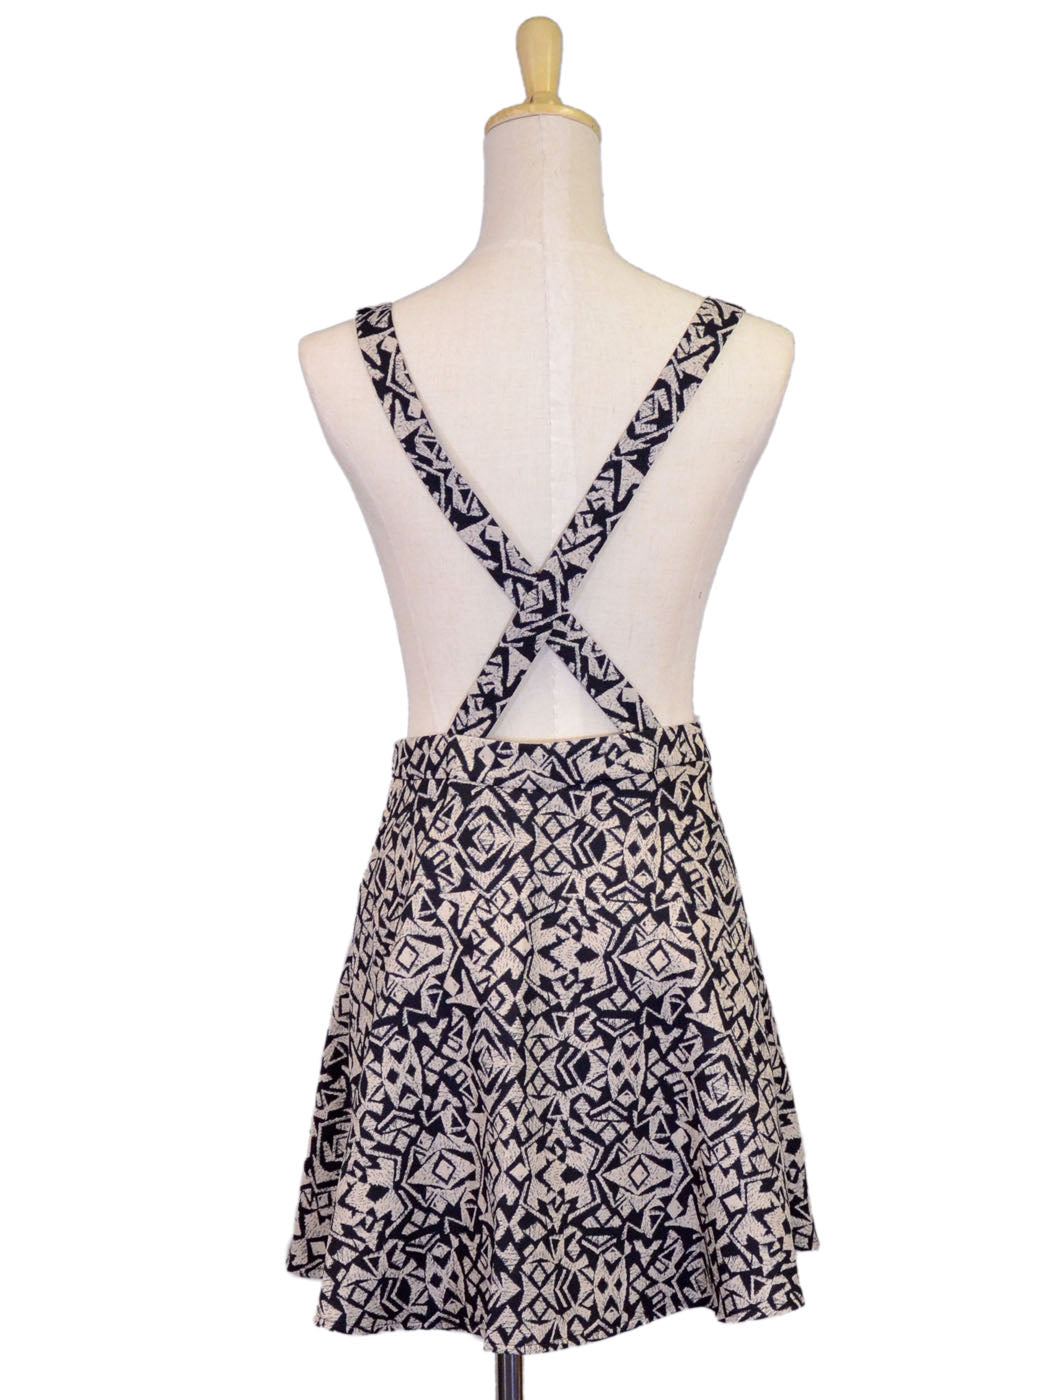 Lush Suspender Apron A-Line Dress With All Over Multicolored Geometric Design - ALILANG.COM